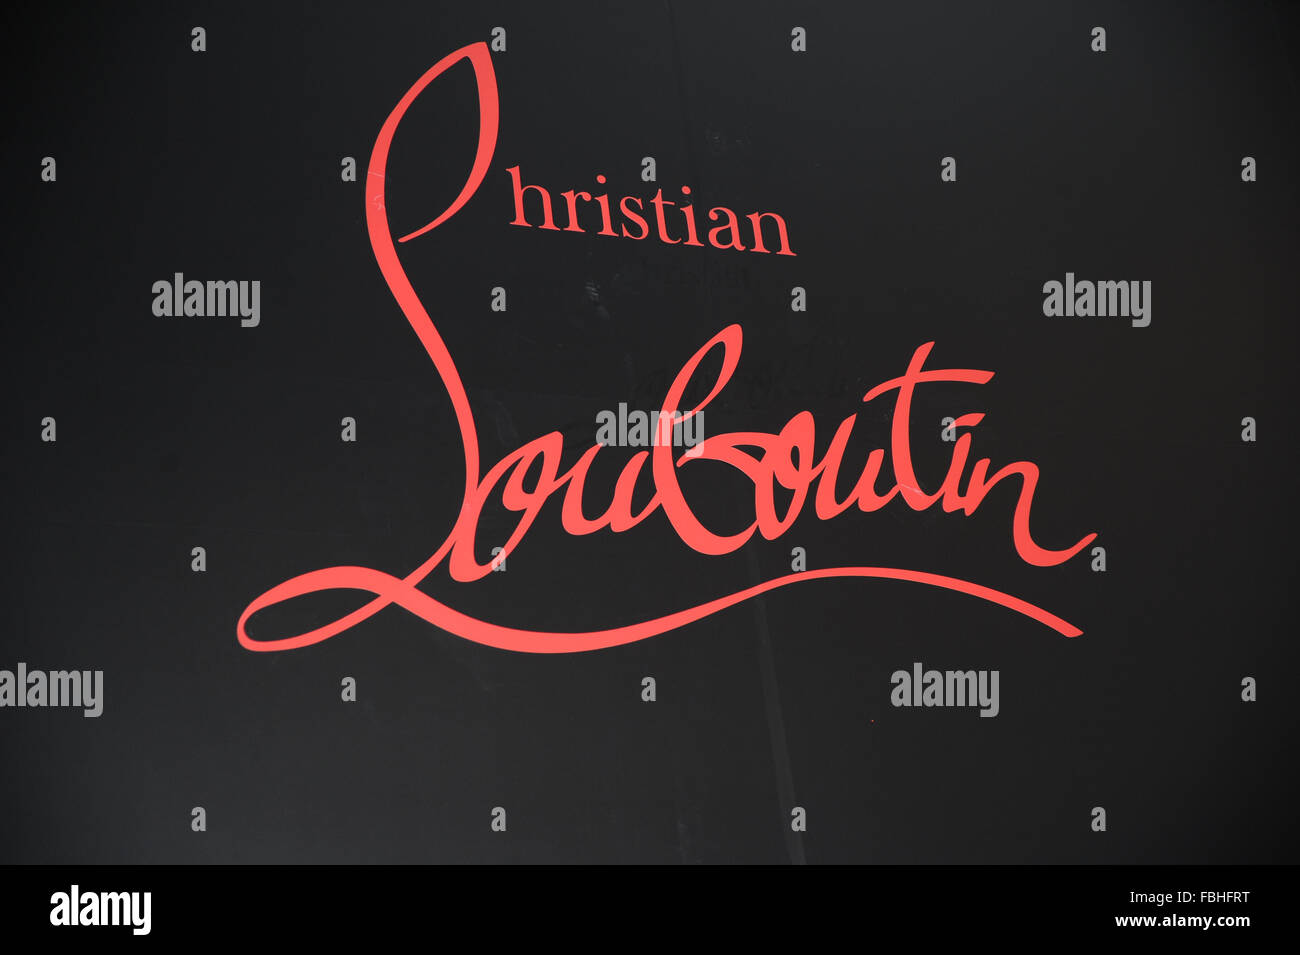 Shoe Designer Christian Louboutin Launches New Boutique Selling ...